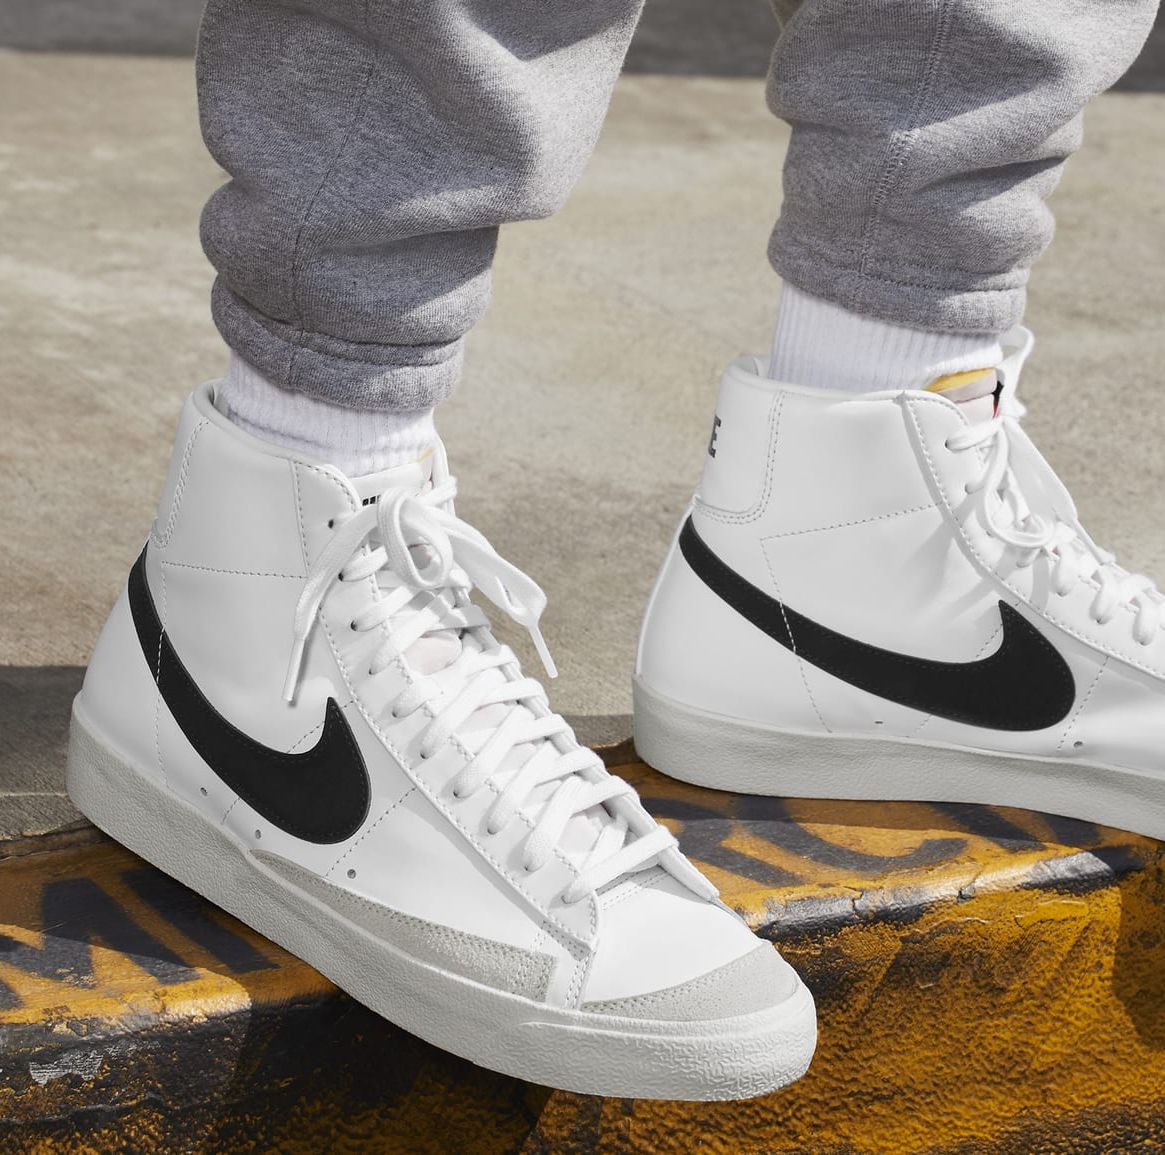 Transparently Ash plaster Reviewing Nike's Best-Selling Blazer Mid '77 Vintage